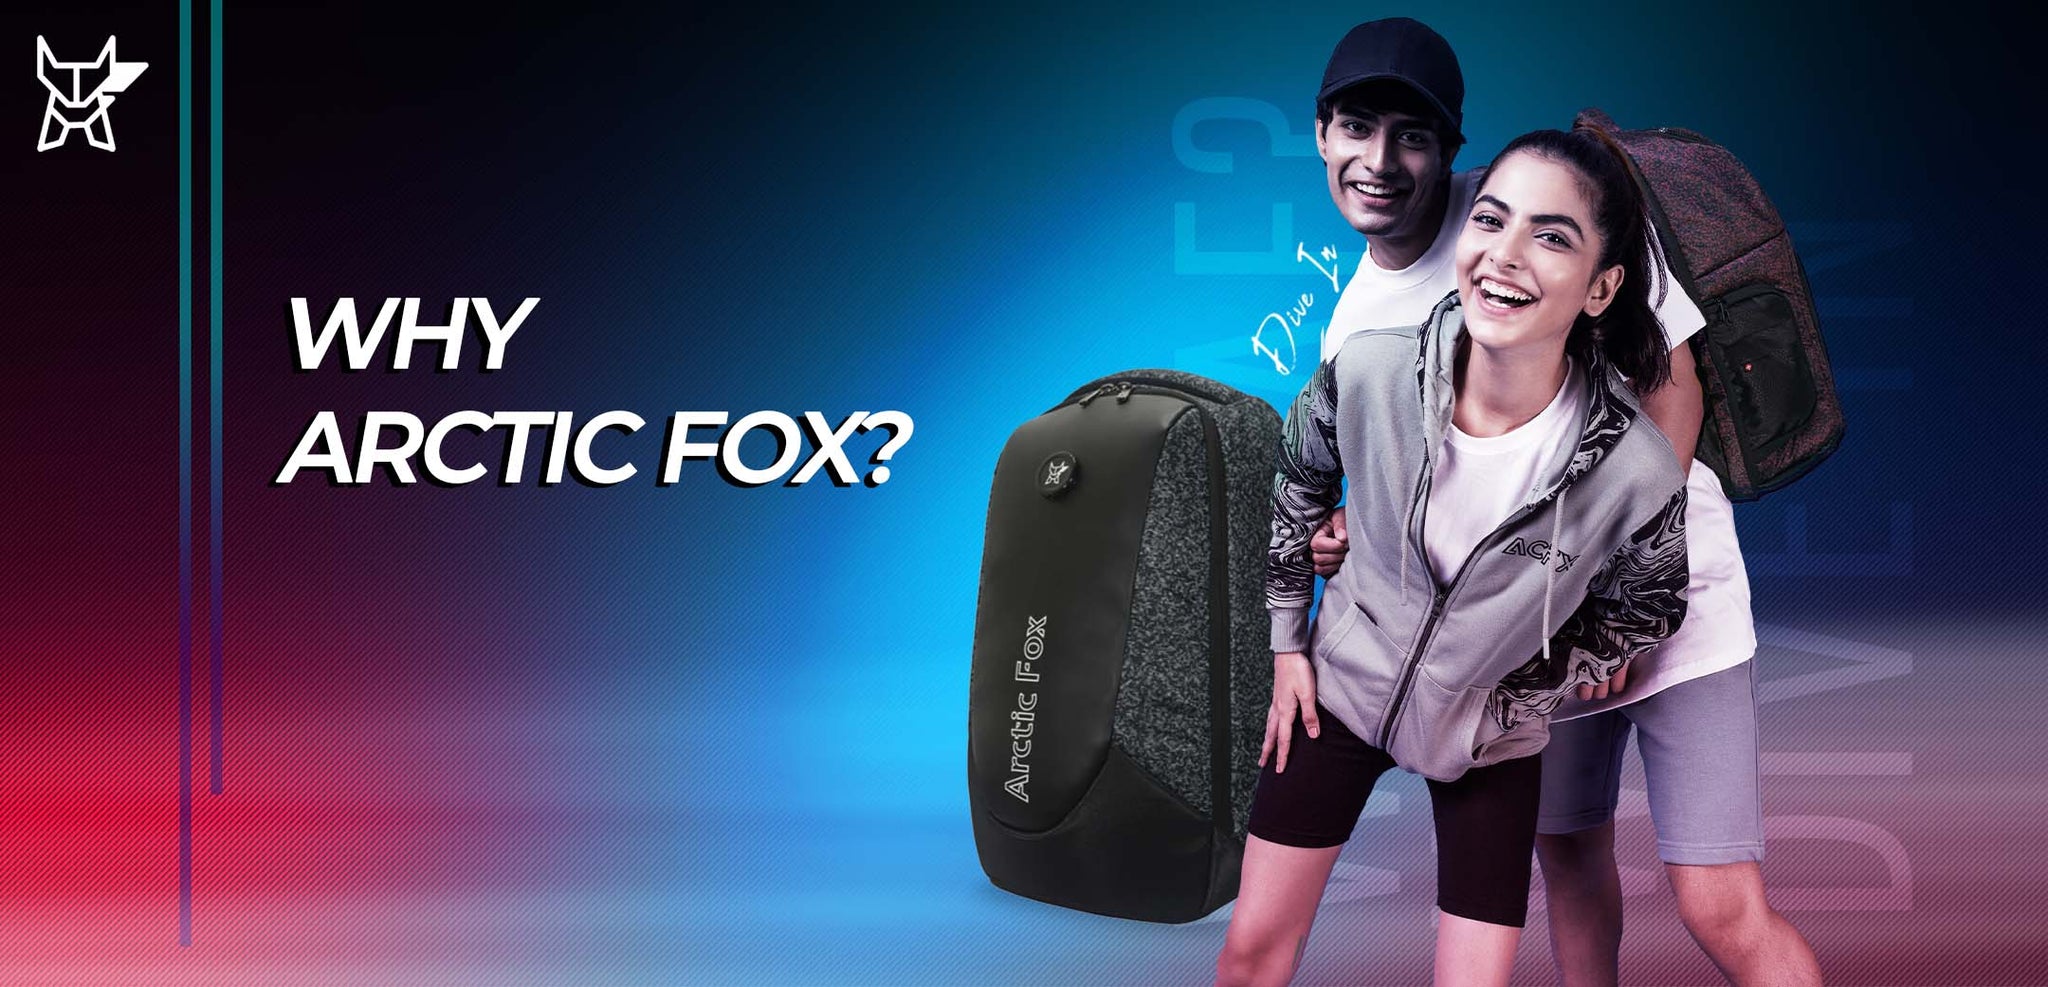 Arctic Fox: Tech-Inspired Design for Consumers on the Move